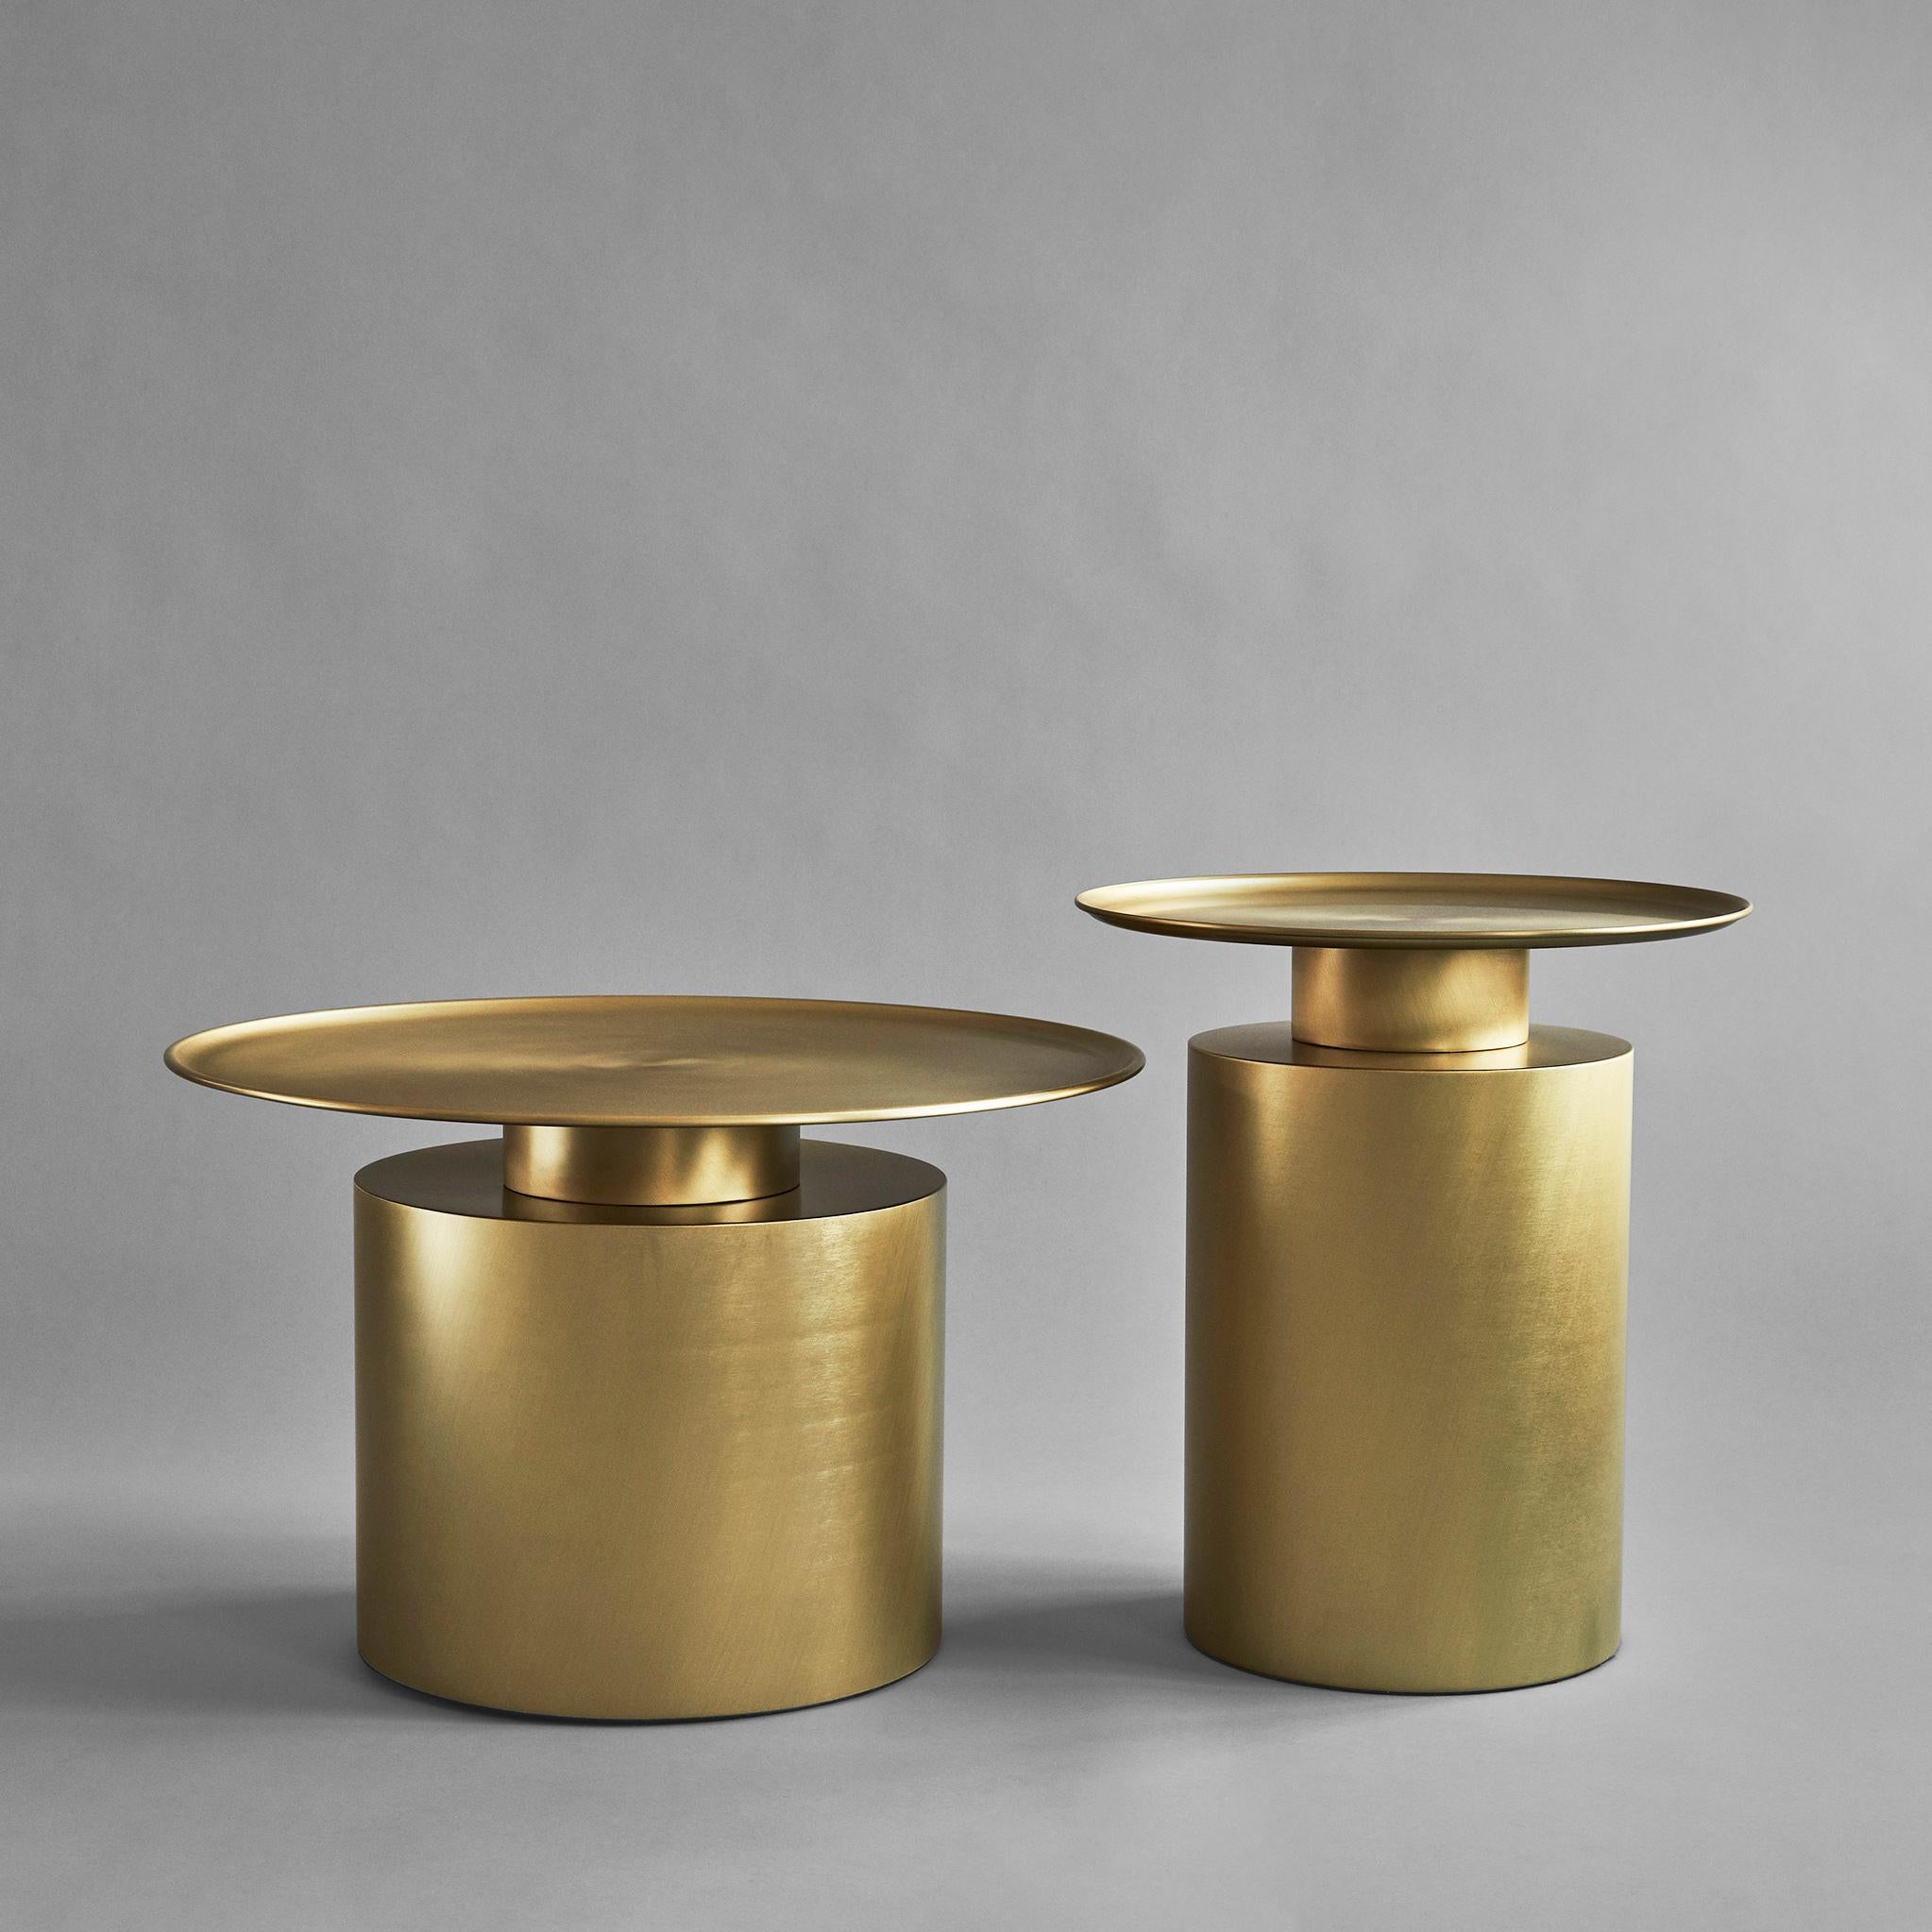 Brass pillar table low by 101 Copenhagen
Designed by Kristian Sofus Hansen & Tommy Hyldahl
Dimensions: L41 / W65 /H65 CM
Materials: plated metal

Pillar is inspired by the rich lustrous use of material in the 1930´s Art Deco movement. The